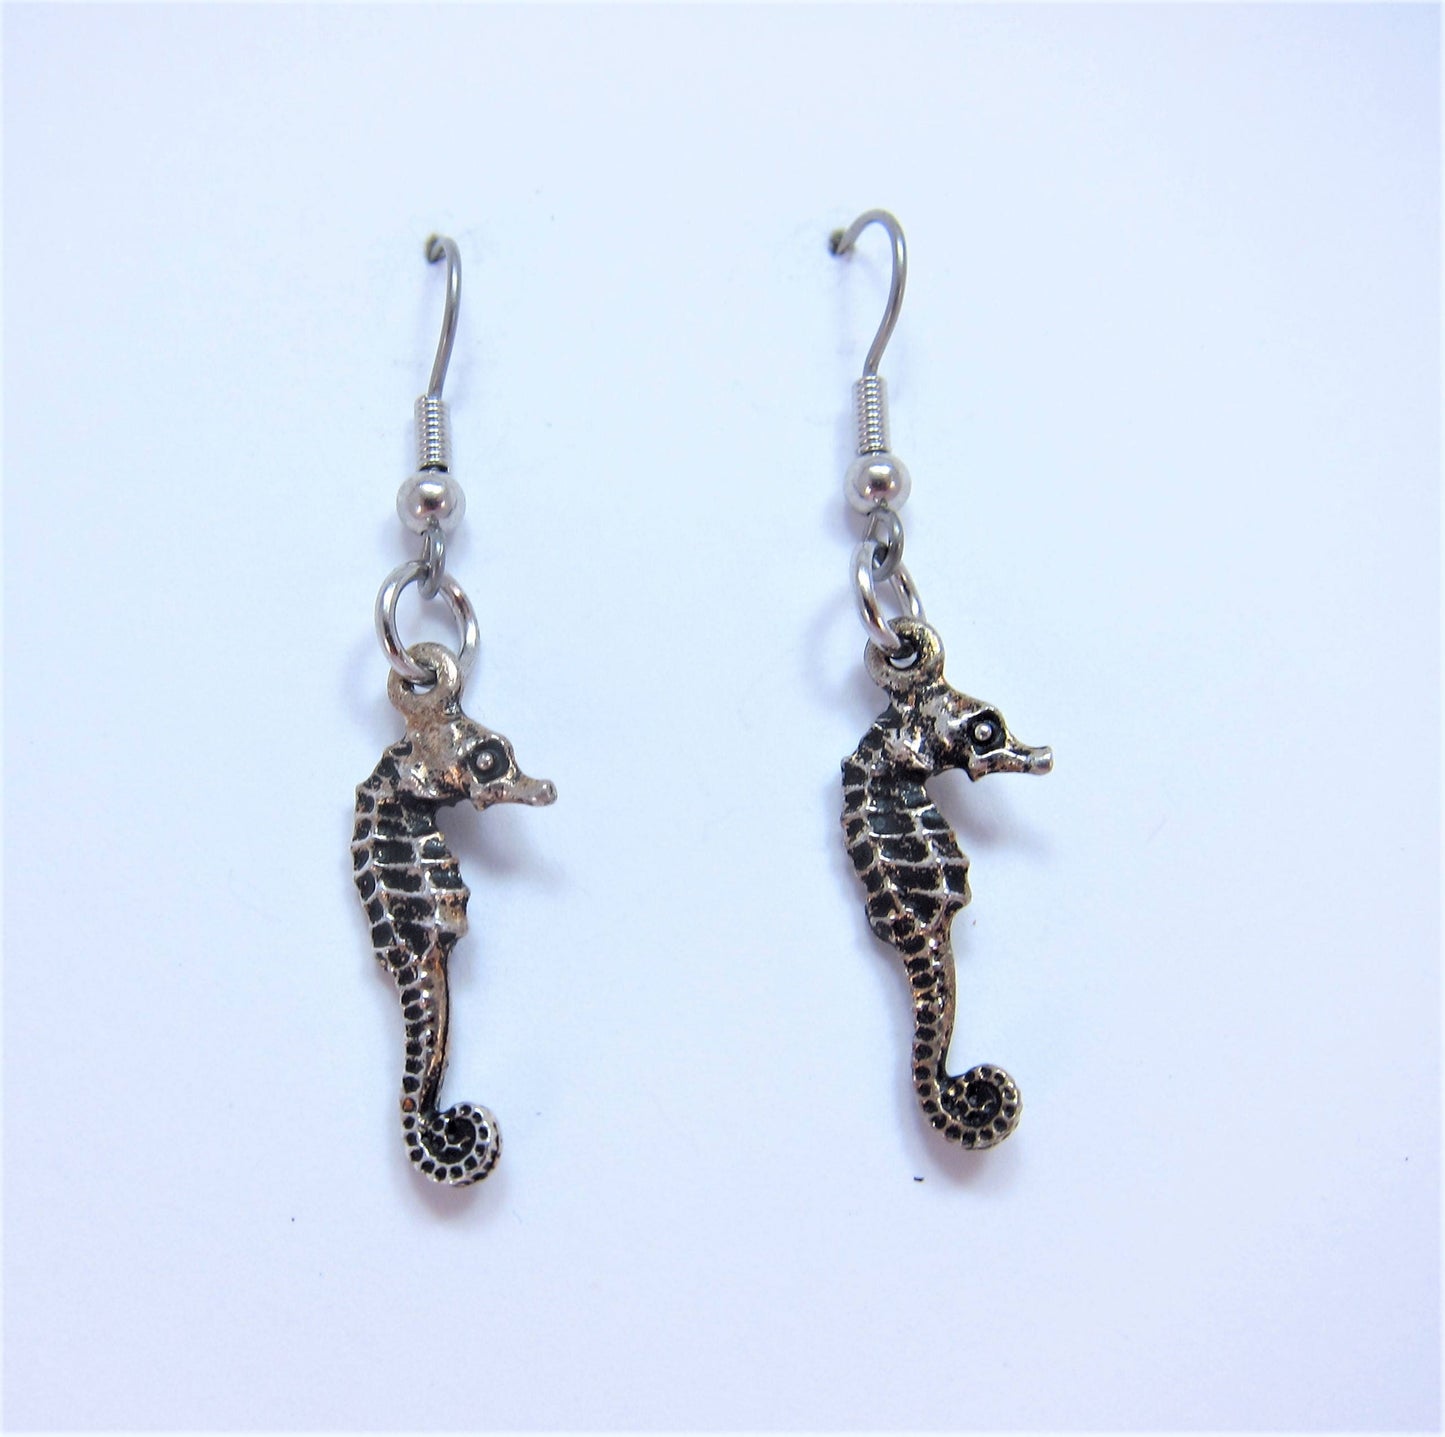 Charmed! Sea horse earrings silver plate antique finish on hypoallergenic surgical steel hooks